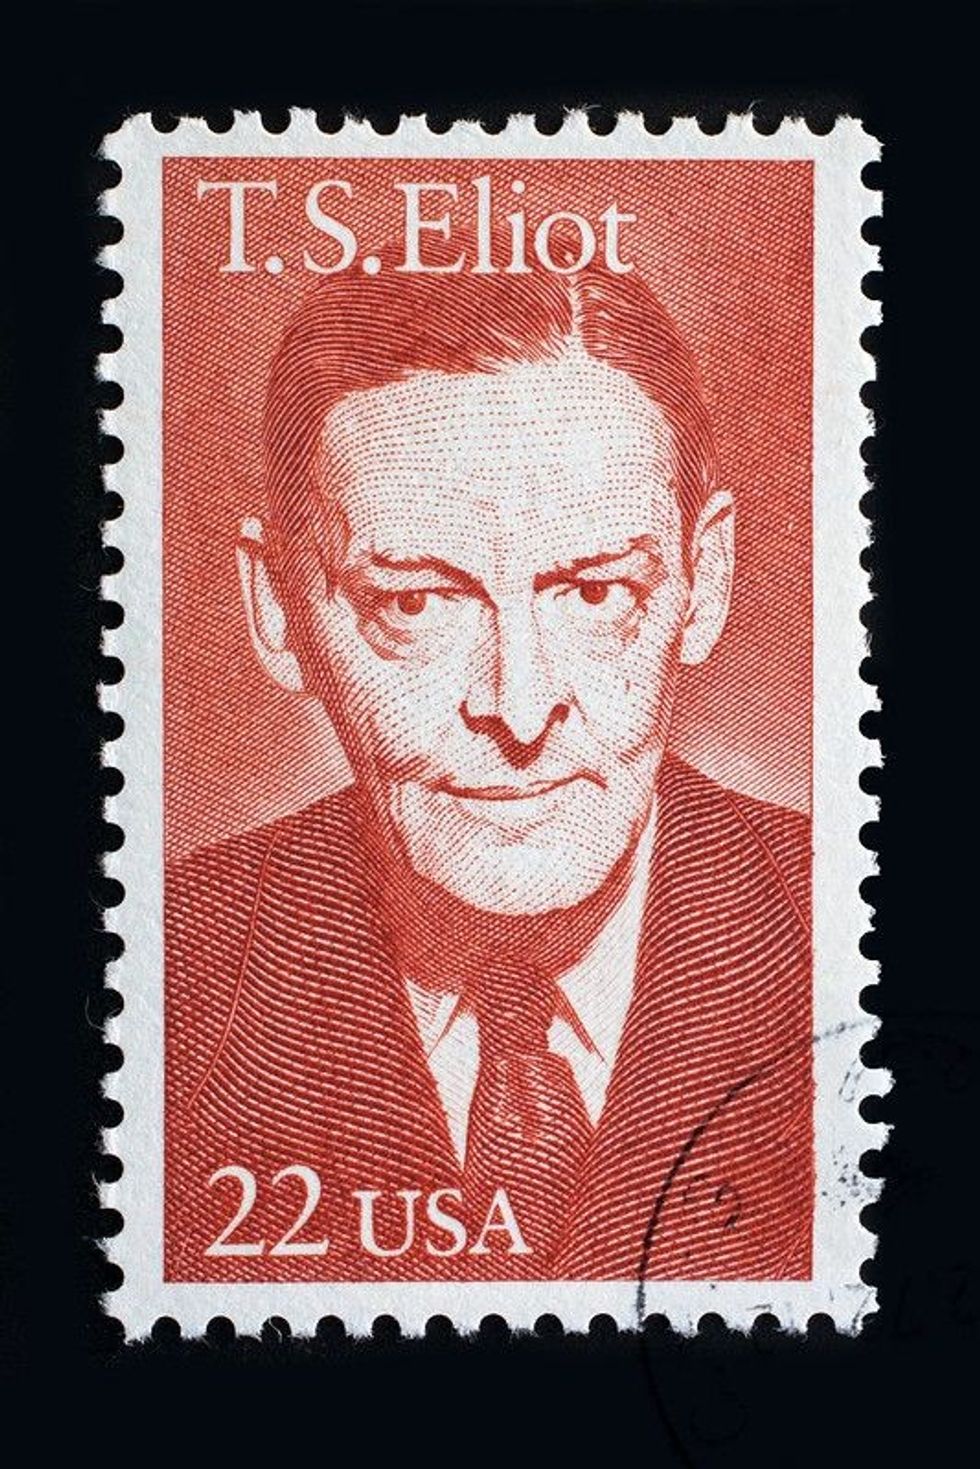 Stamp post of TS Eliot